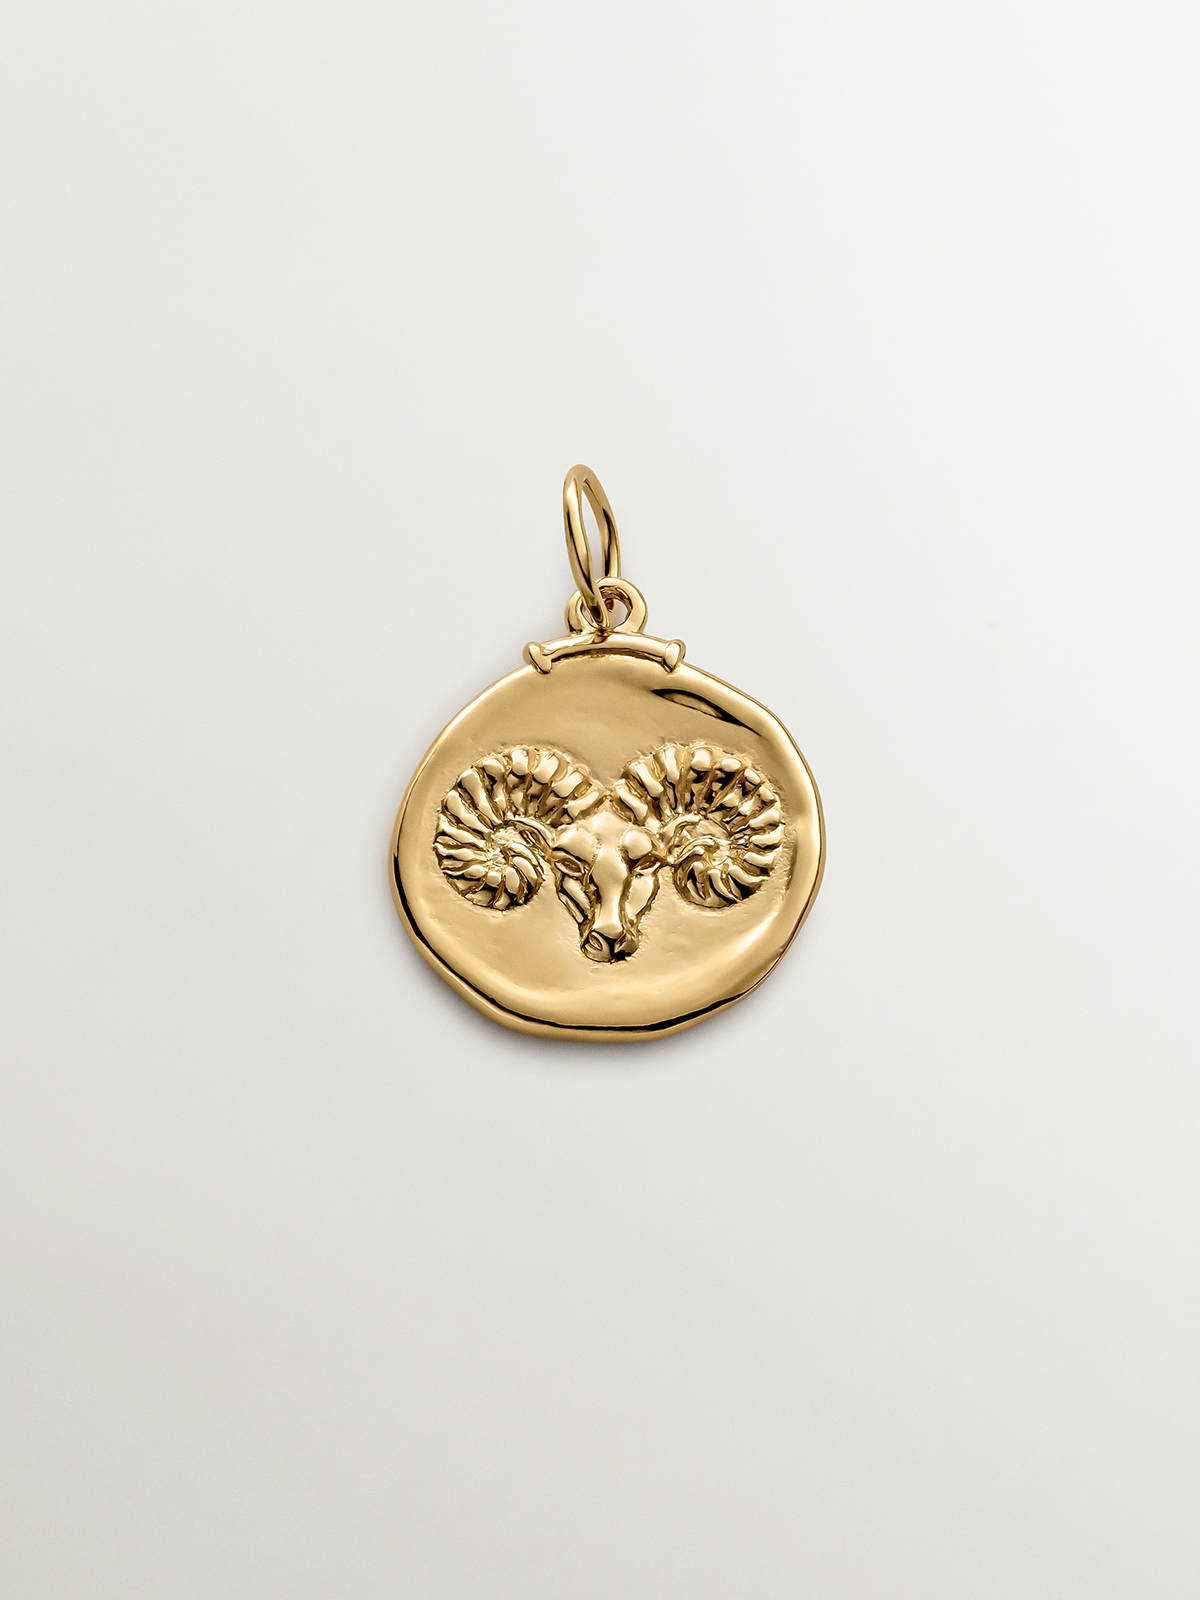 Aries Charm made of 925 silver bathed in 18K yellow gold.